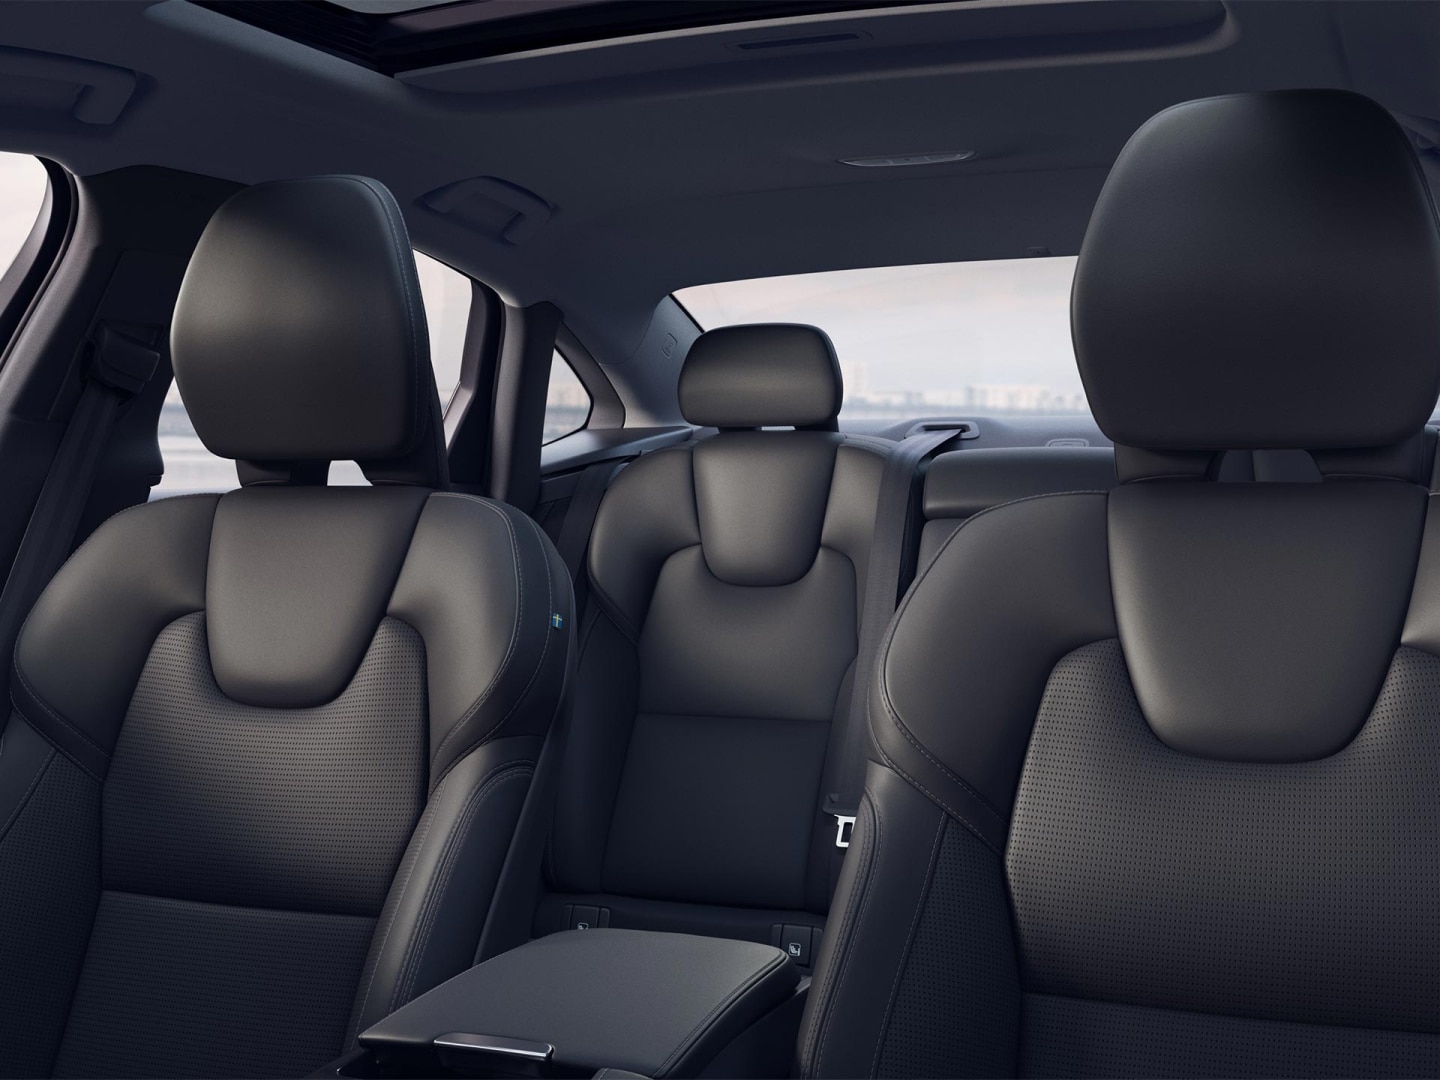 Interior view of the seats in charcoal Nappa leather inside a Volvo S90.